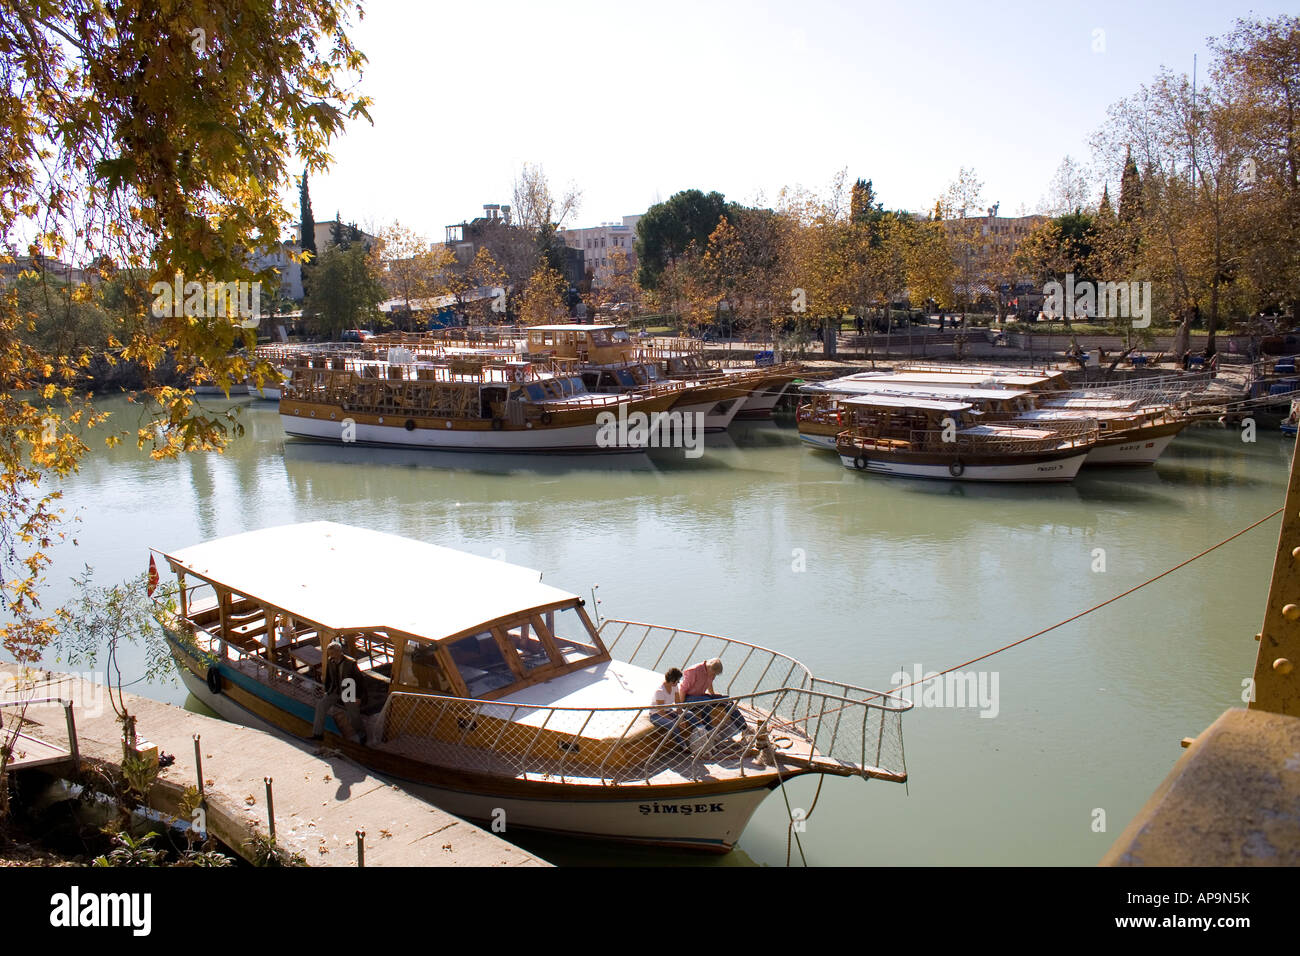 Manavgat River with tourist boats Stock Photo